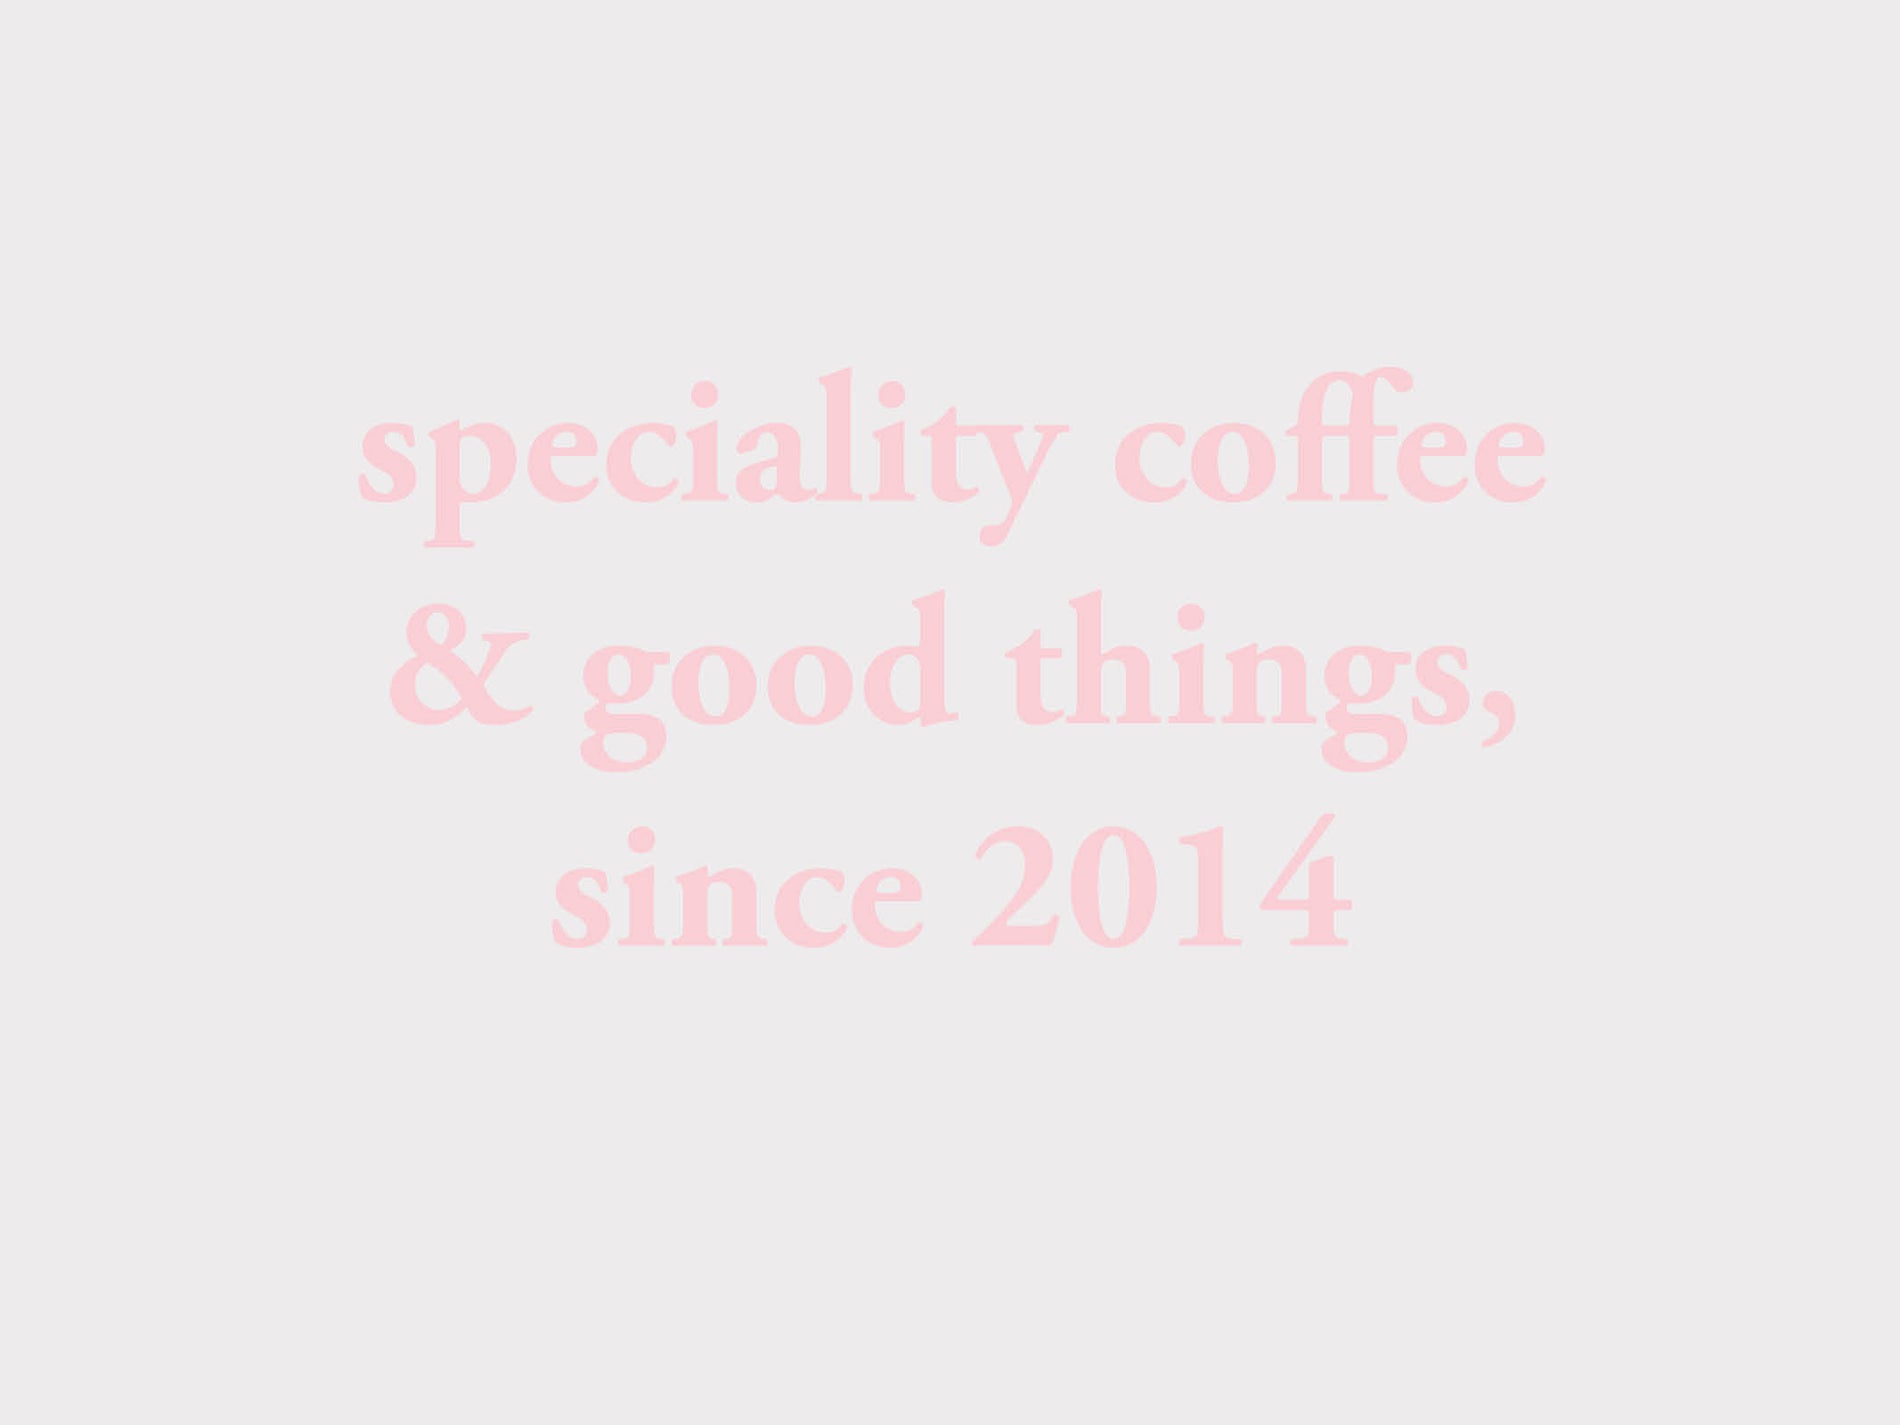 Speciality coffee and good things